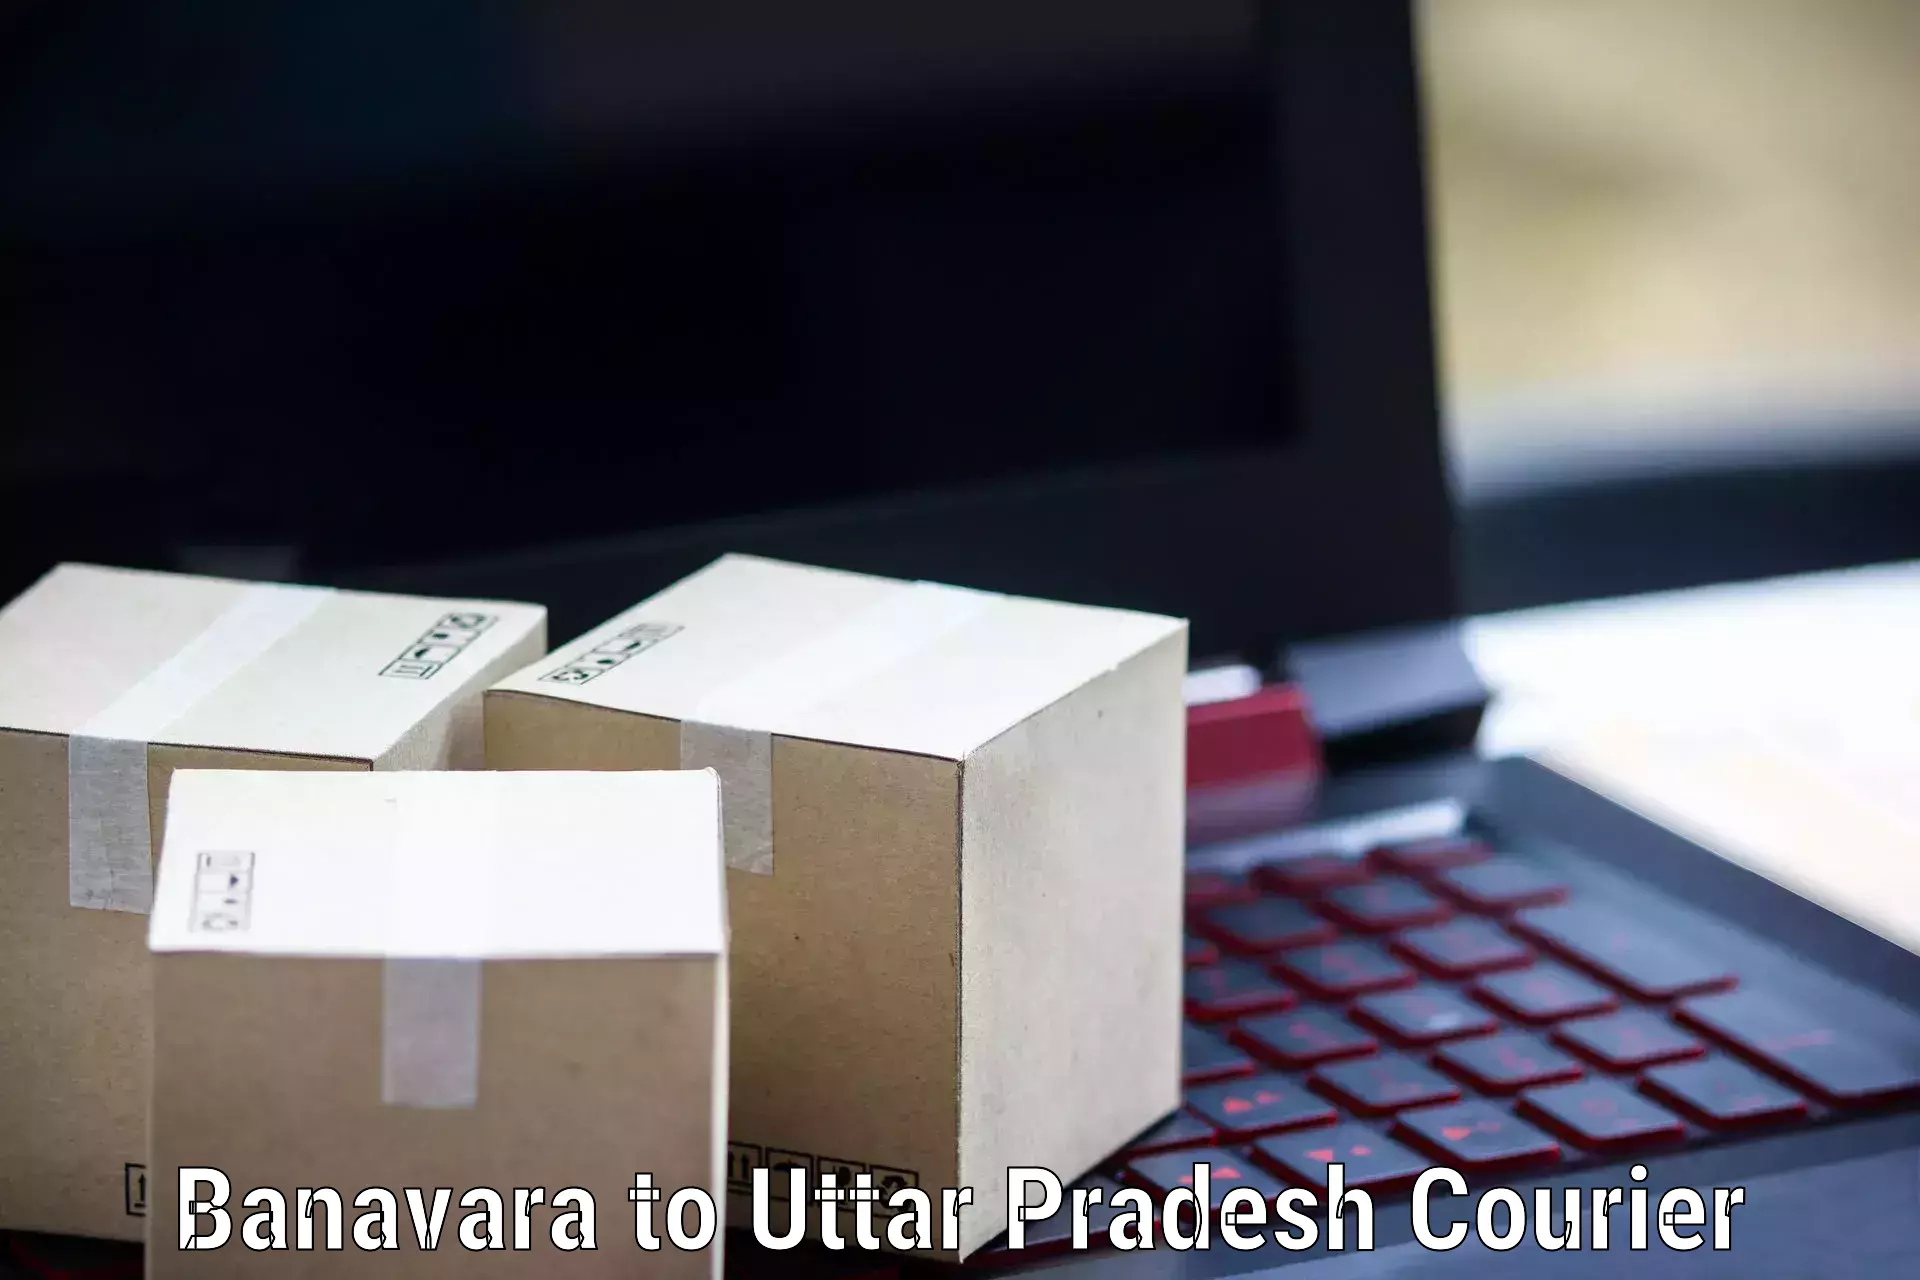 Reliable delivery network in Banavara to Gorakhpur